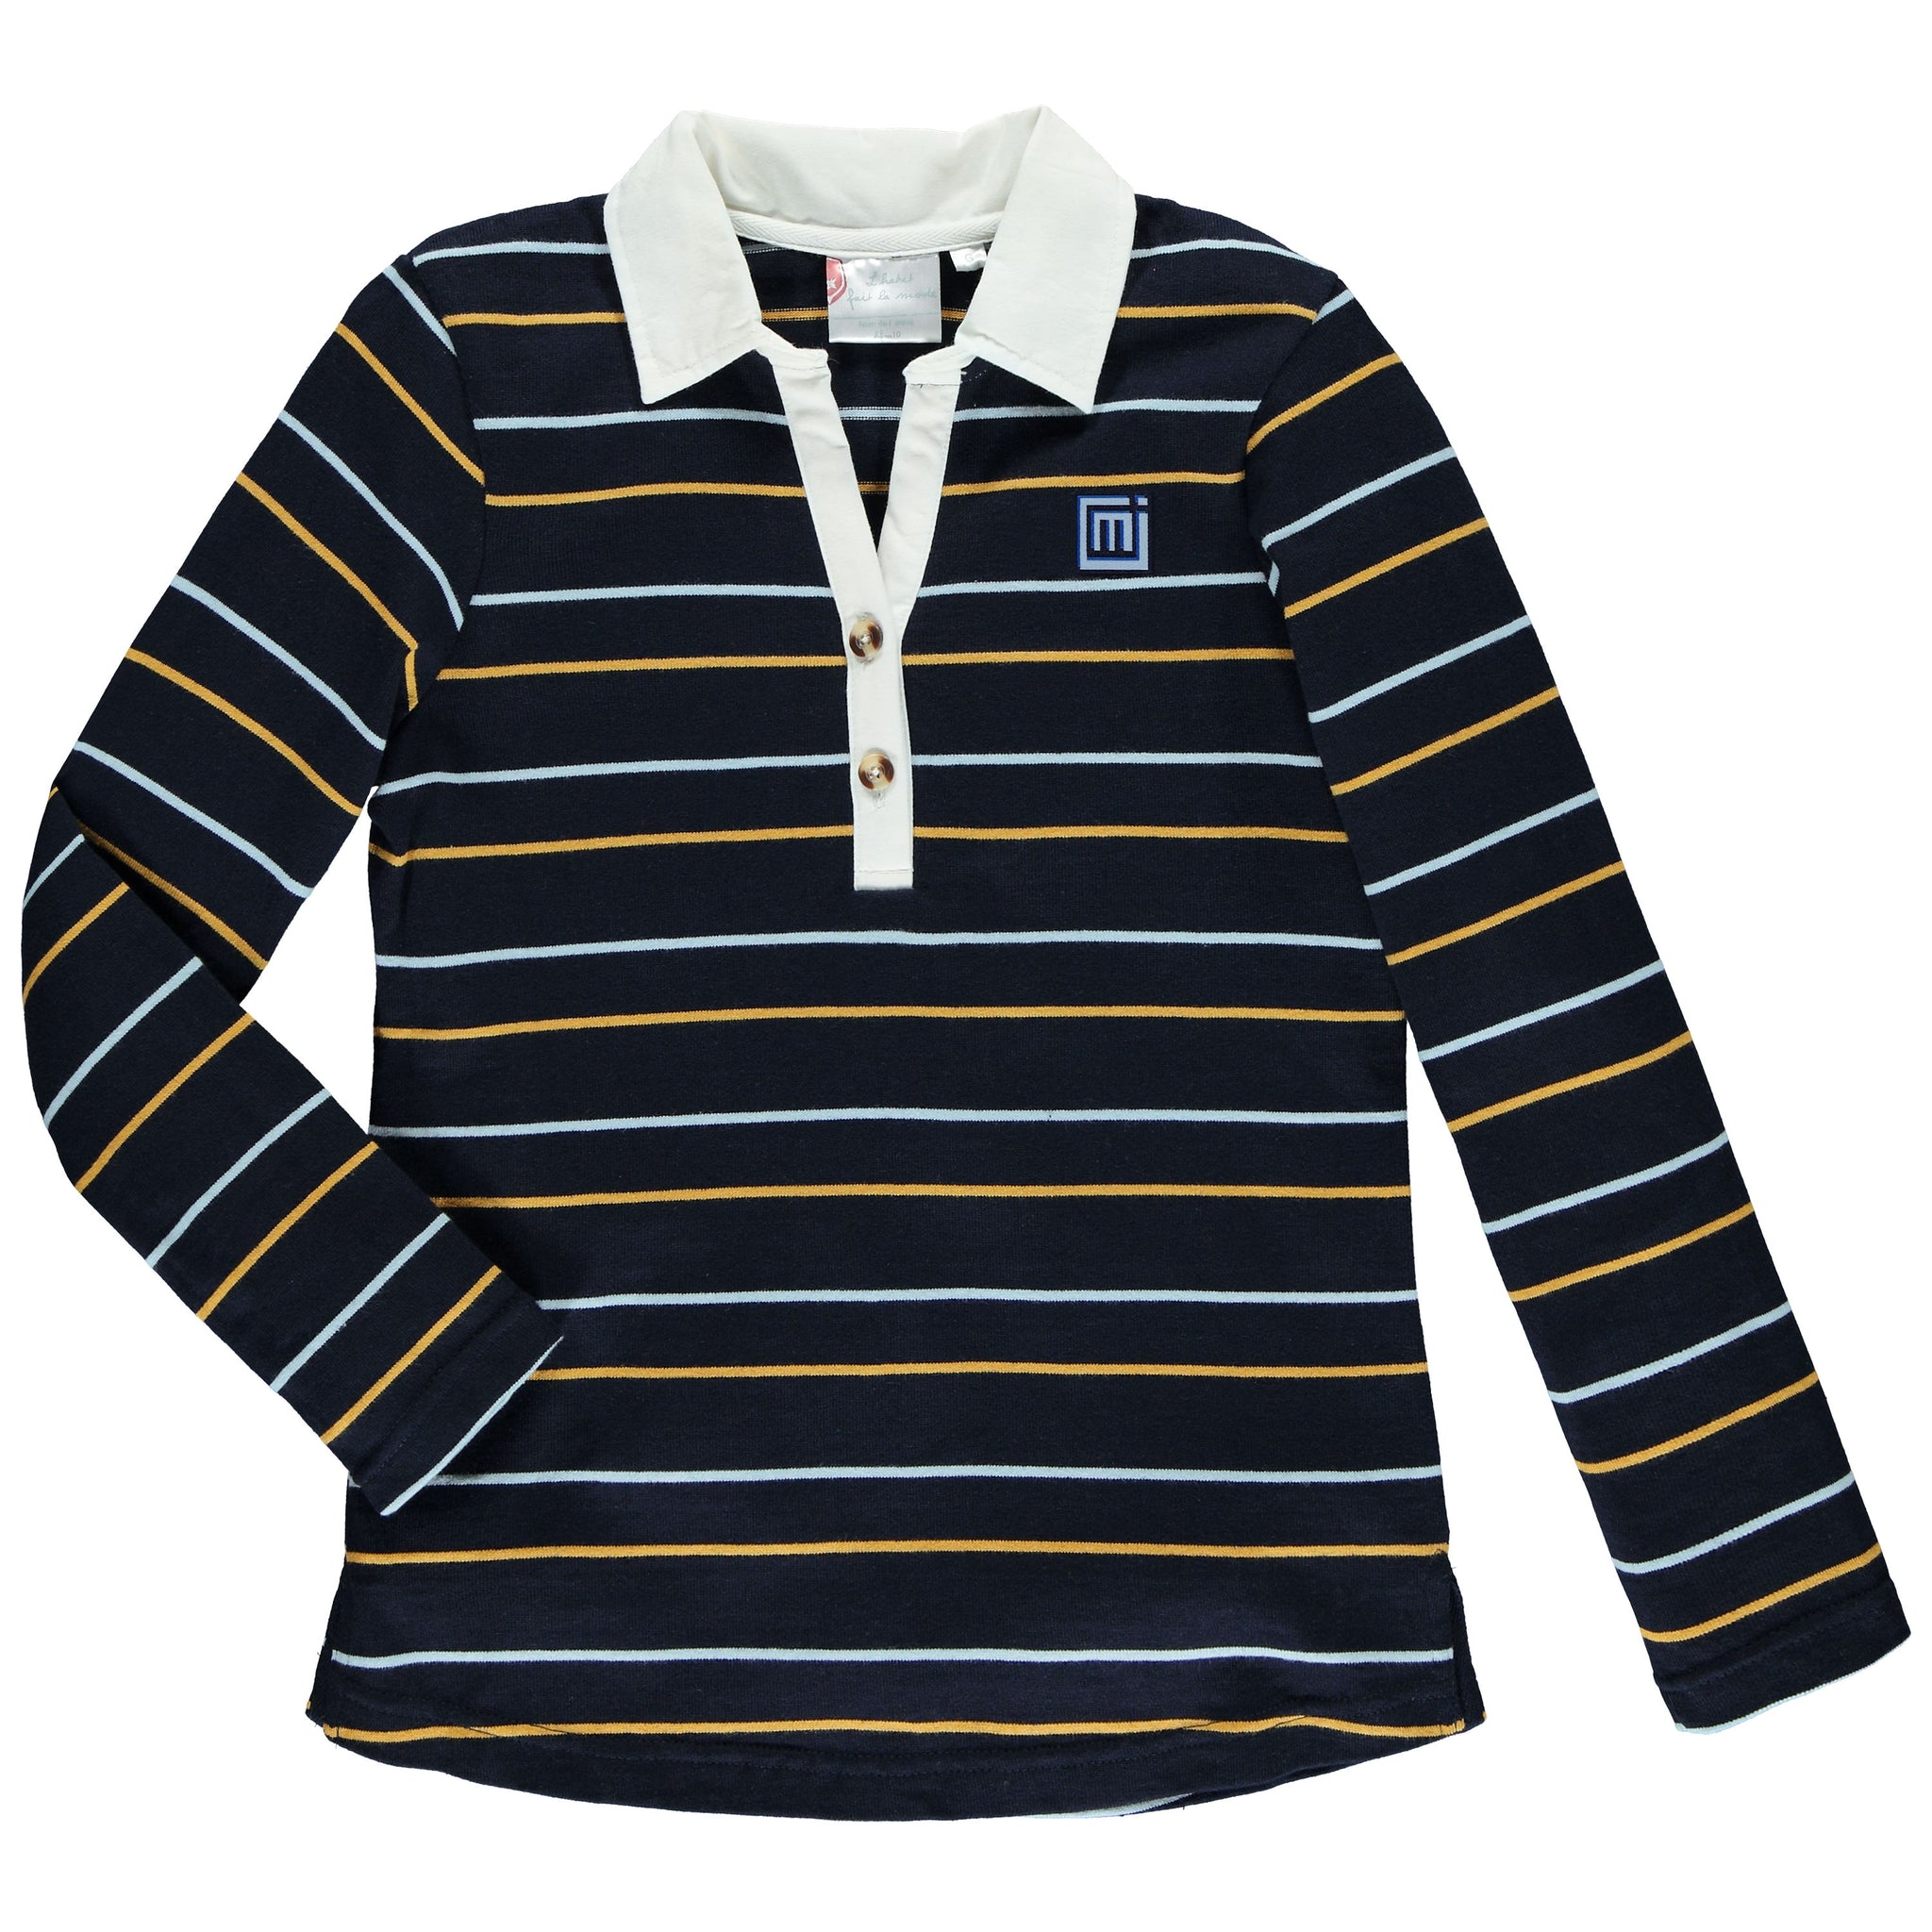 Chandail style « rugby » enfant